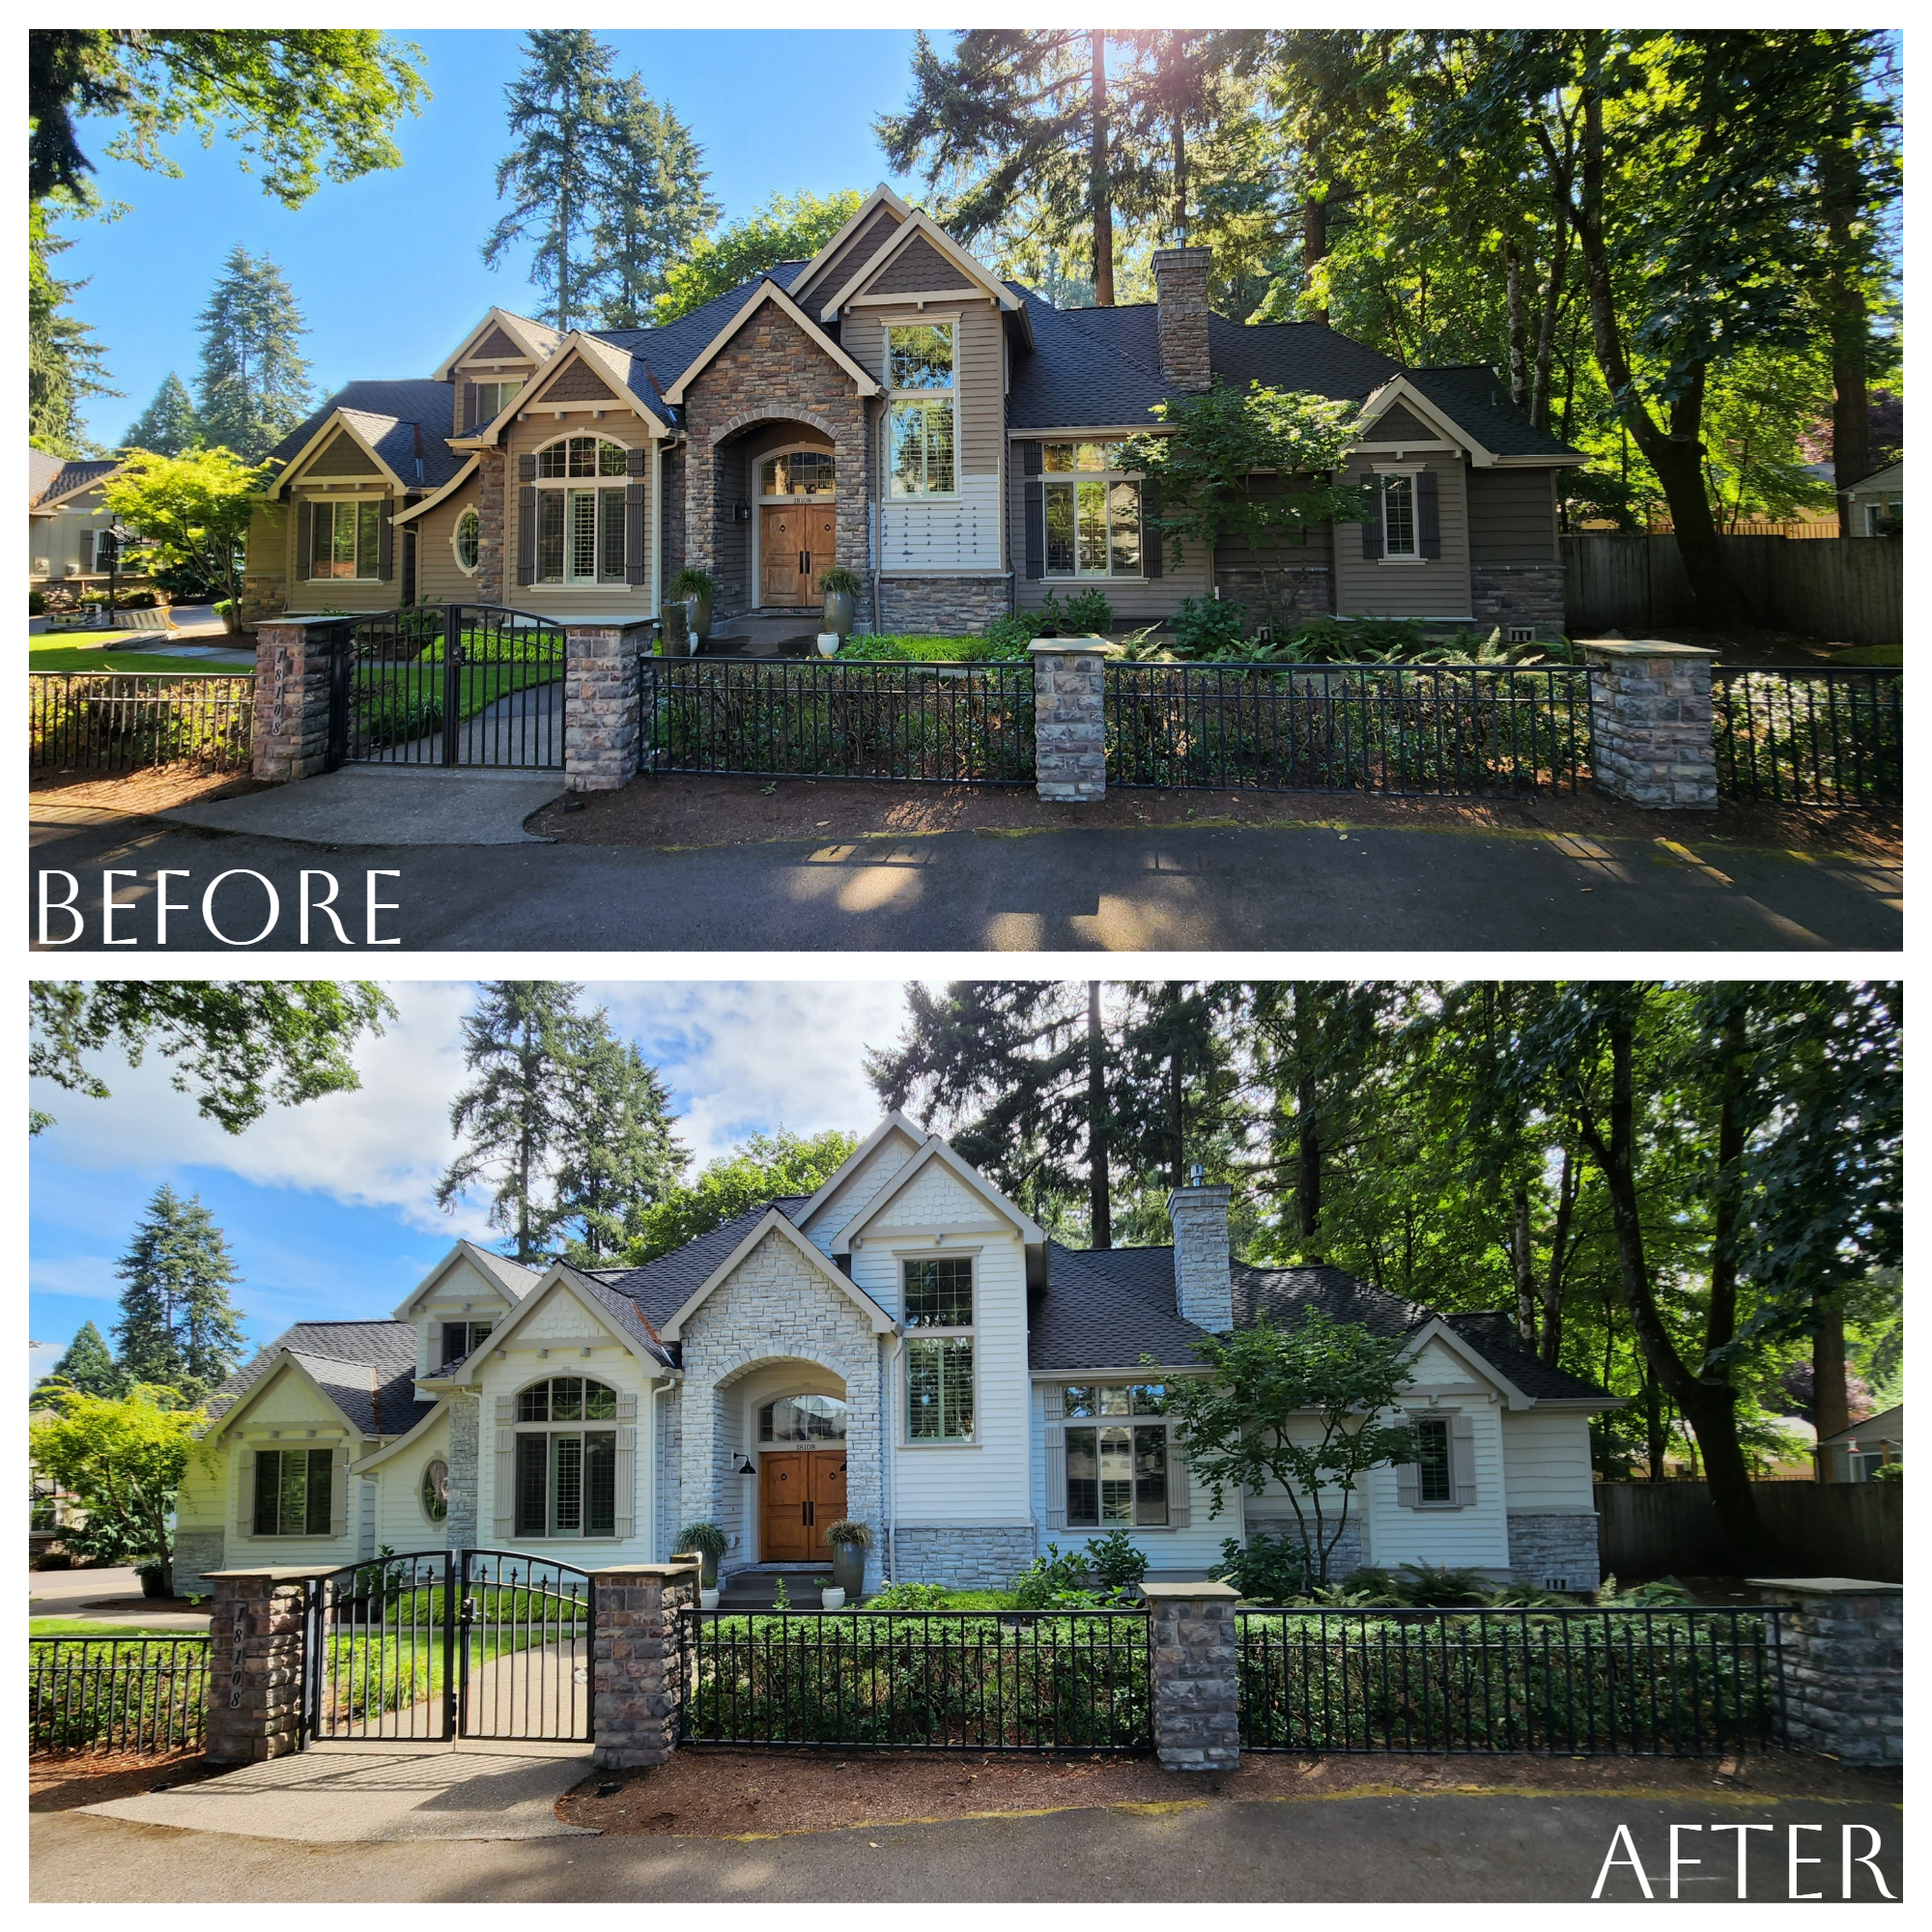 Two pictures of a house before and after exterior painting renovation.